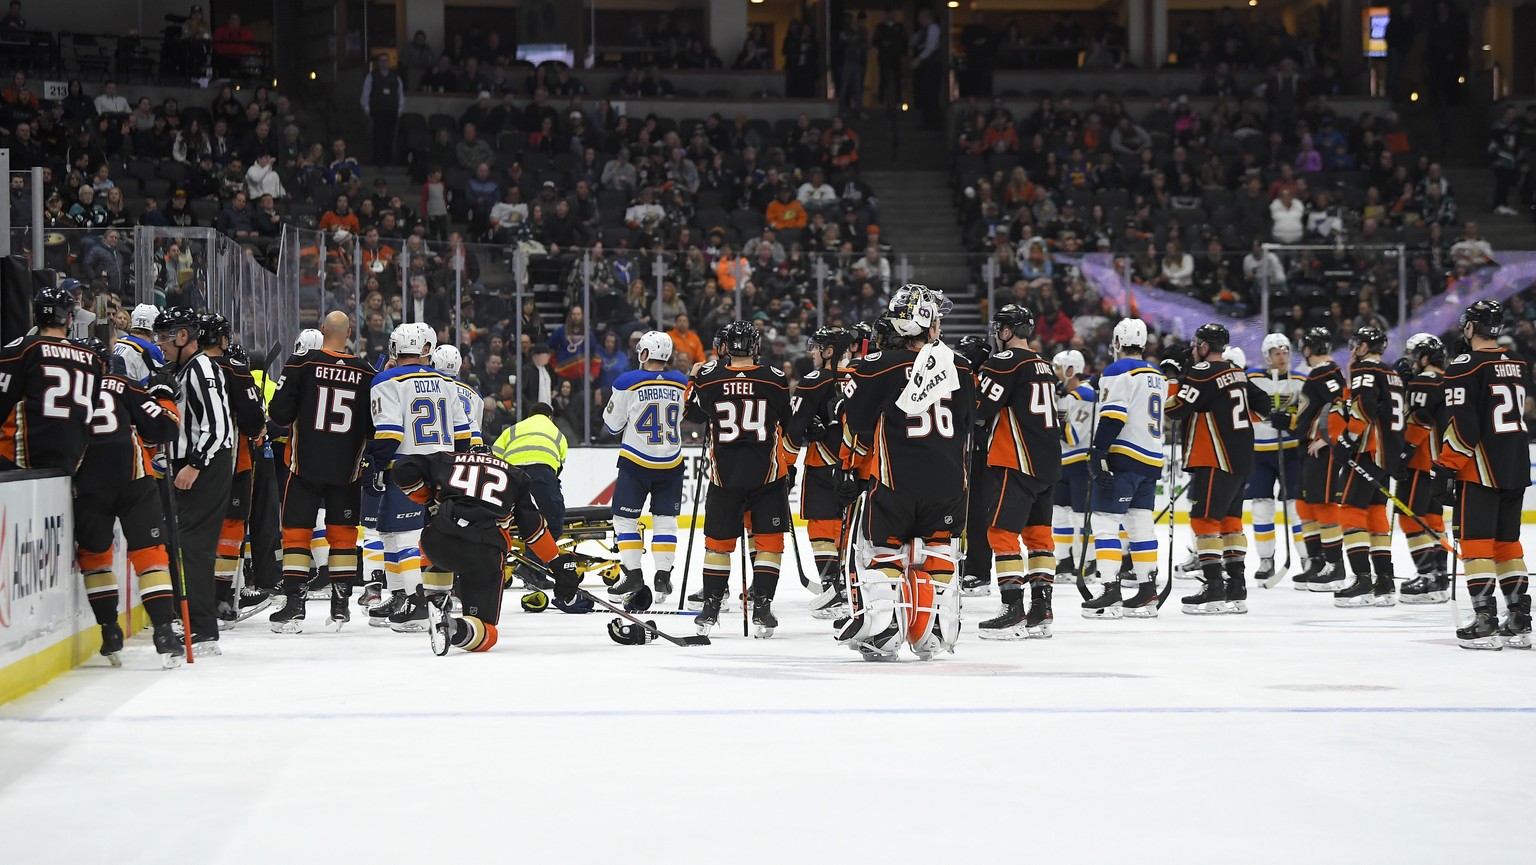 Members of the St. Louis Blues and Anaheim Ducks gather on the ice as Blues defenseman Jay Bouwmeester, who suffered a medical emergency, is worked on by medical personnel during the first period of a ...